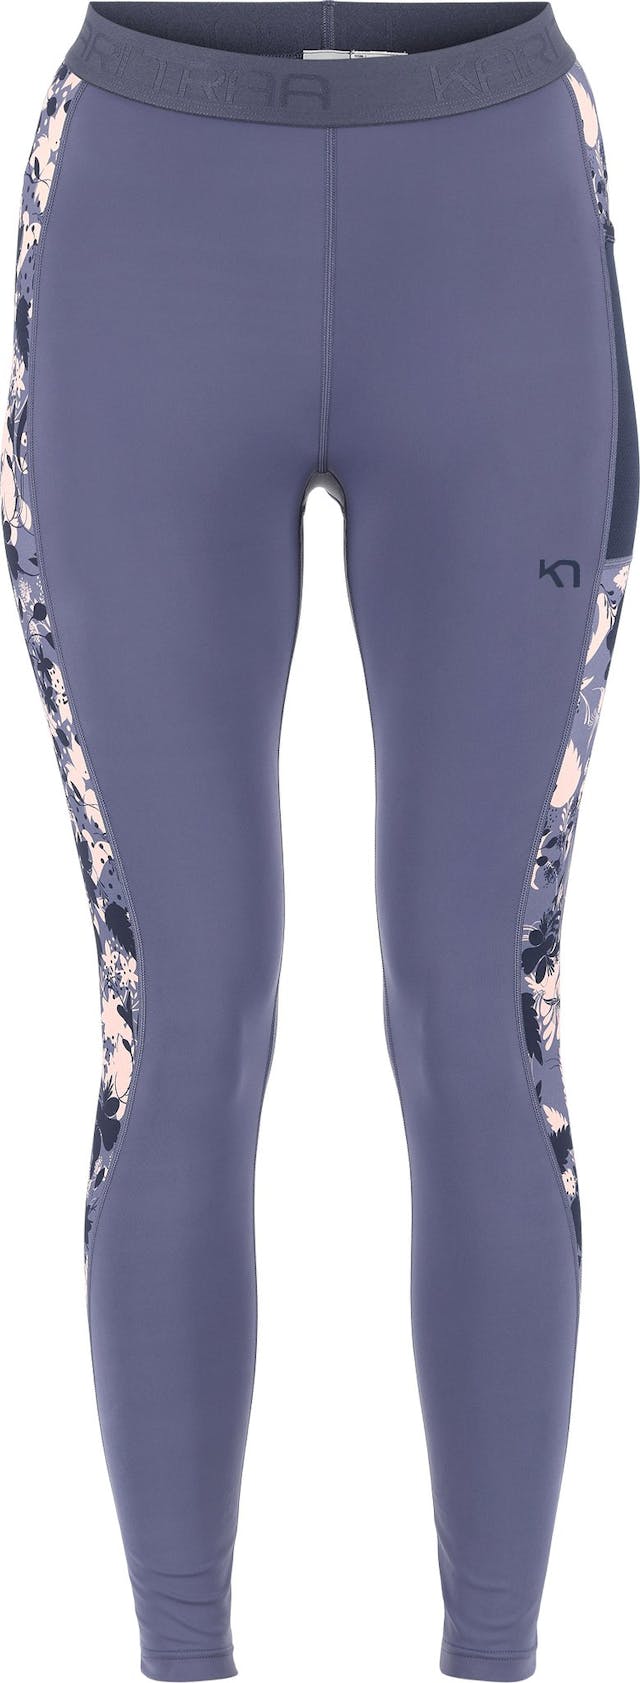 Product image for Vilde Training Tights - Women's